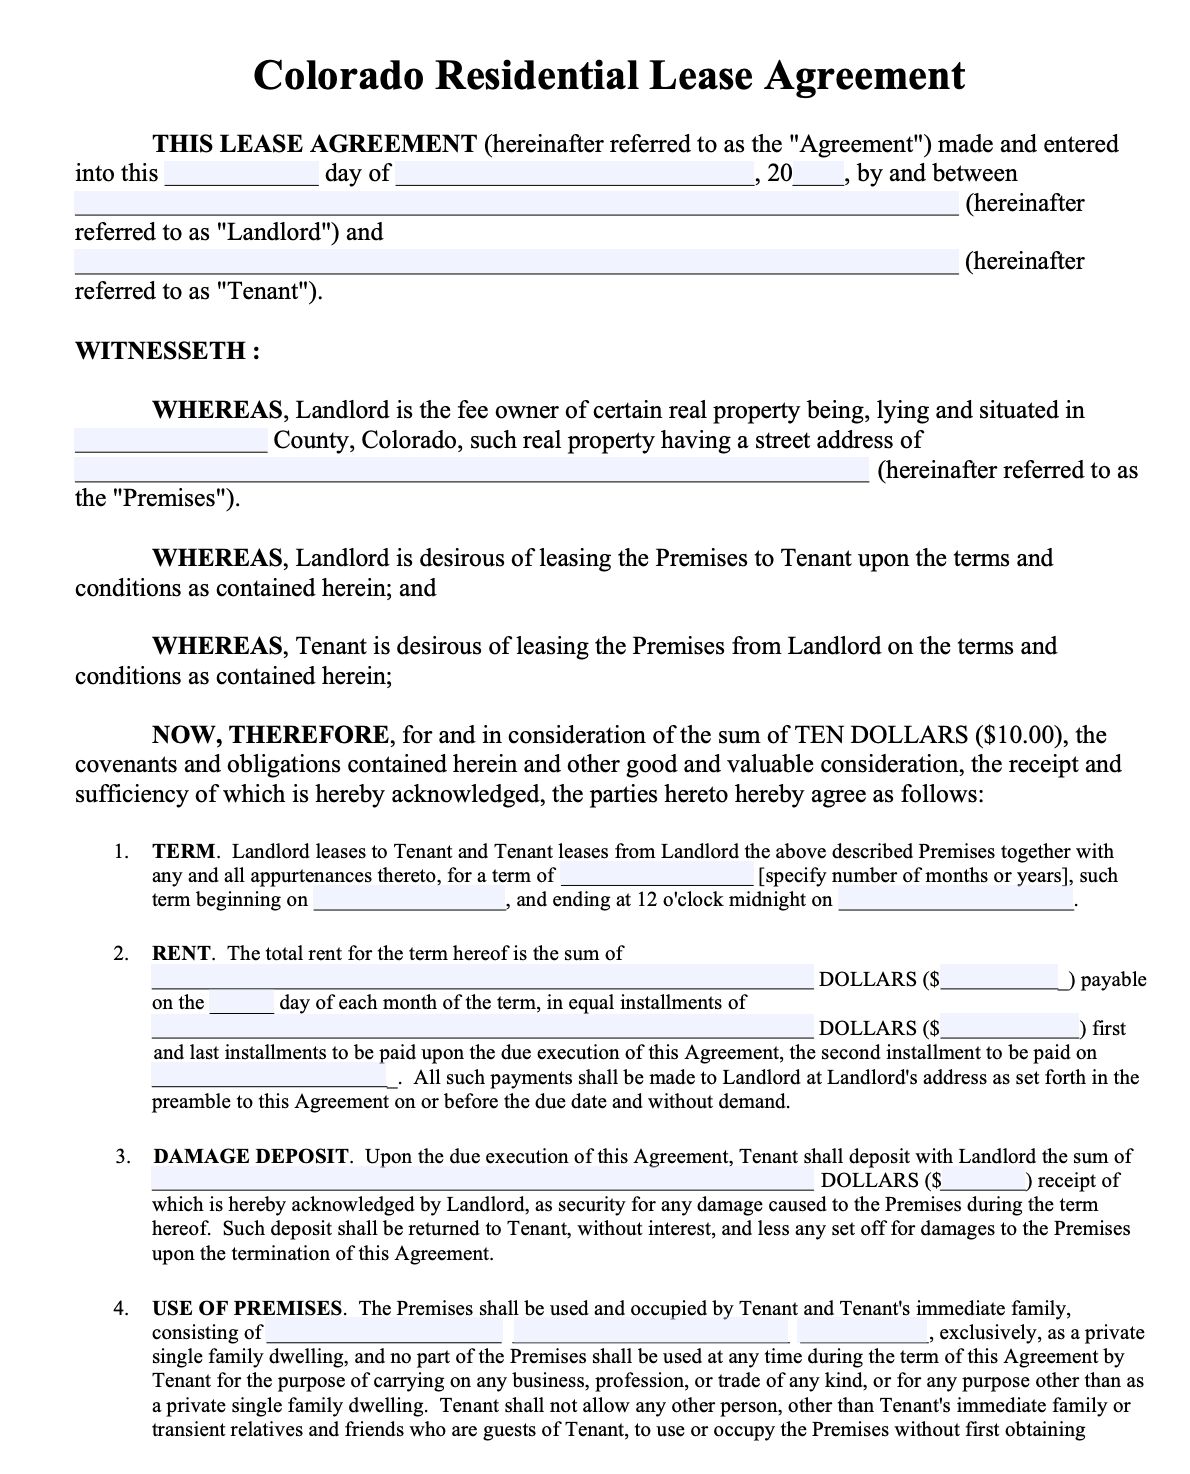 Free Colorado Rental Lease Agreement Templates  PDF  Word Throughout free residential lease agreement template